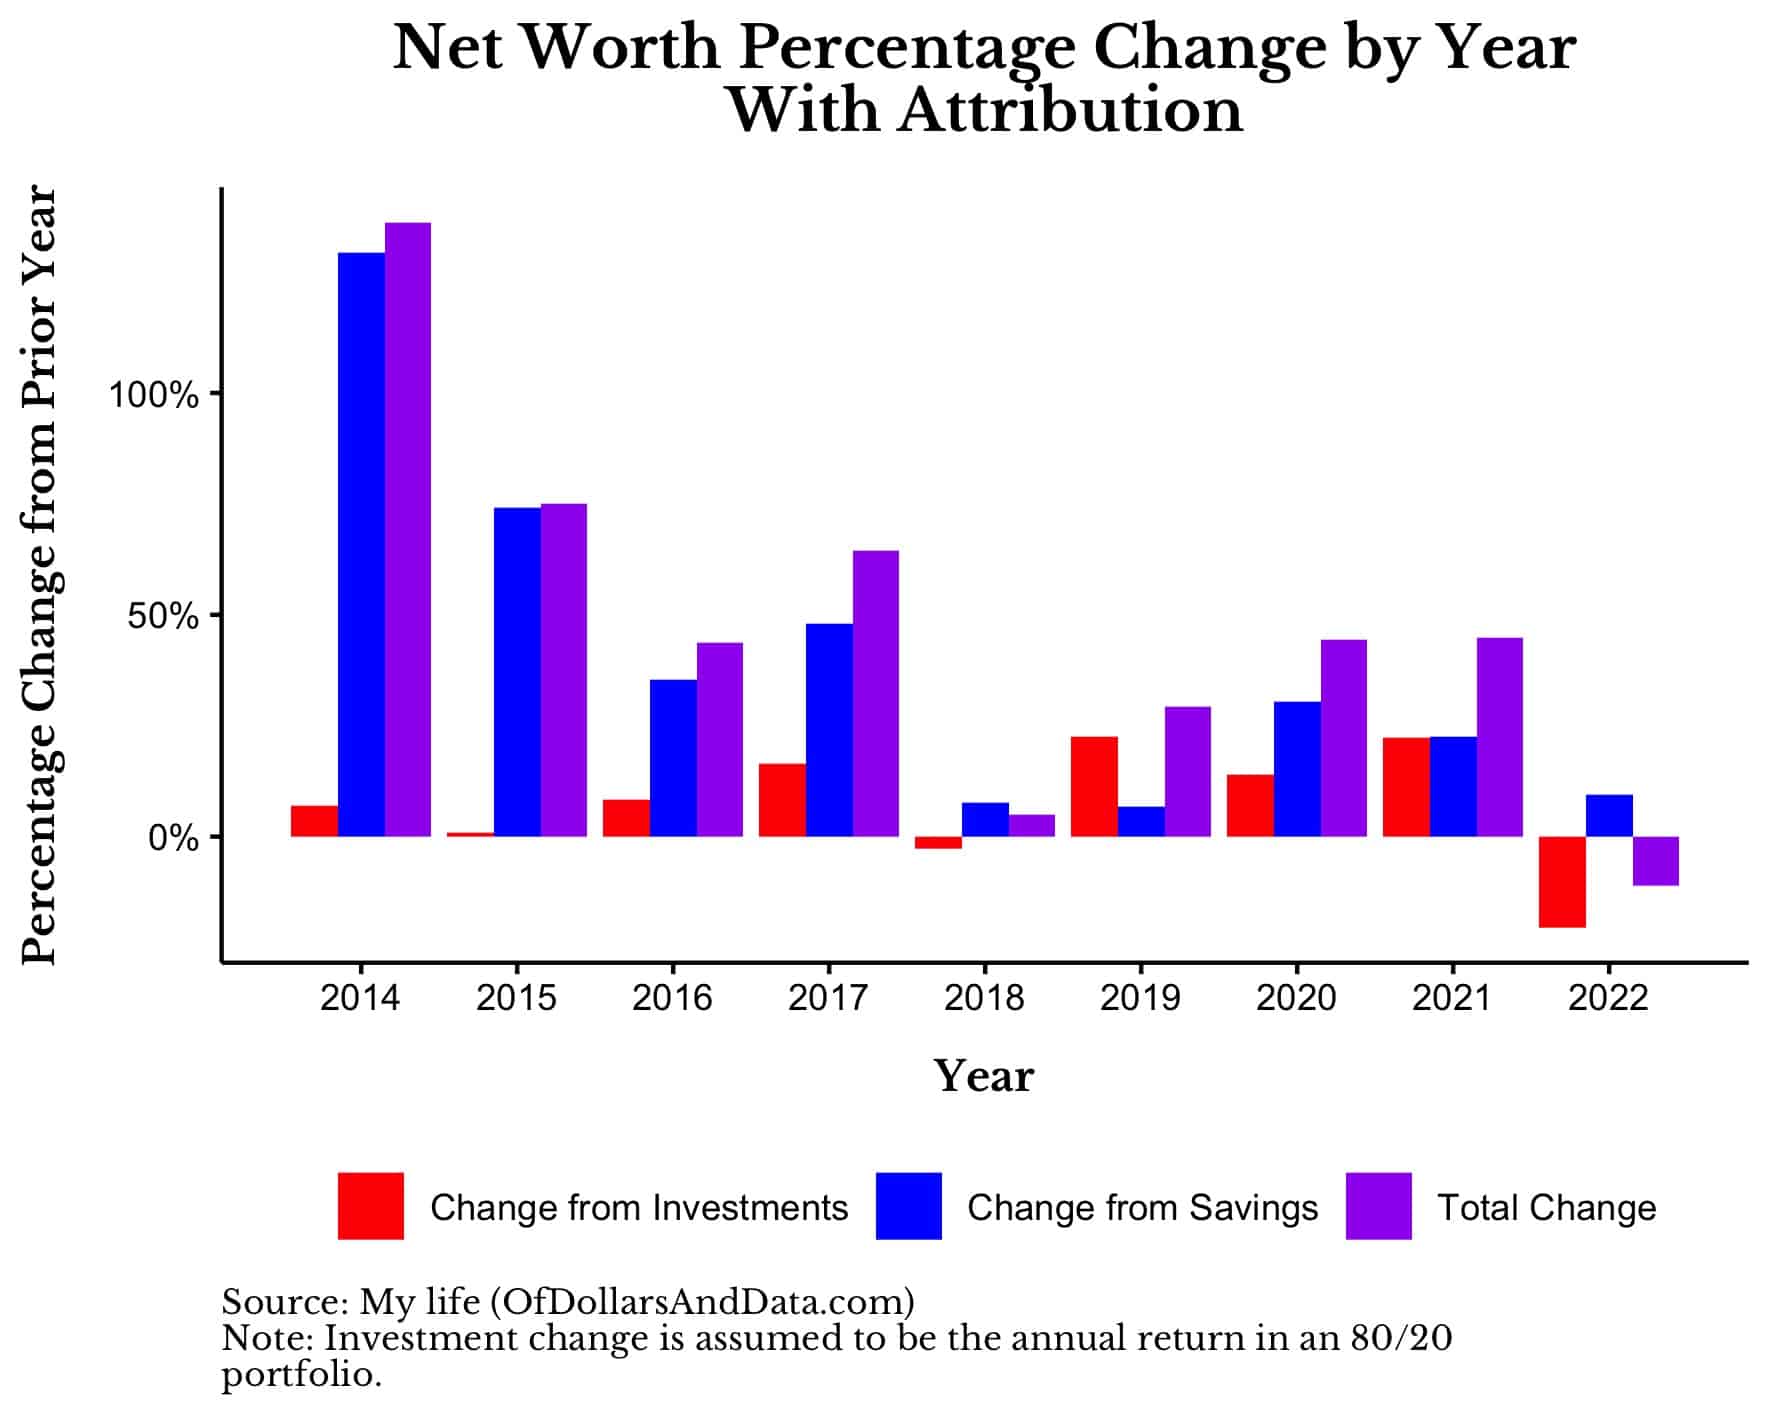 Nick Maggiulli net worth percentage change by year with attribution